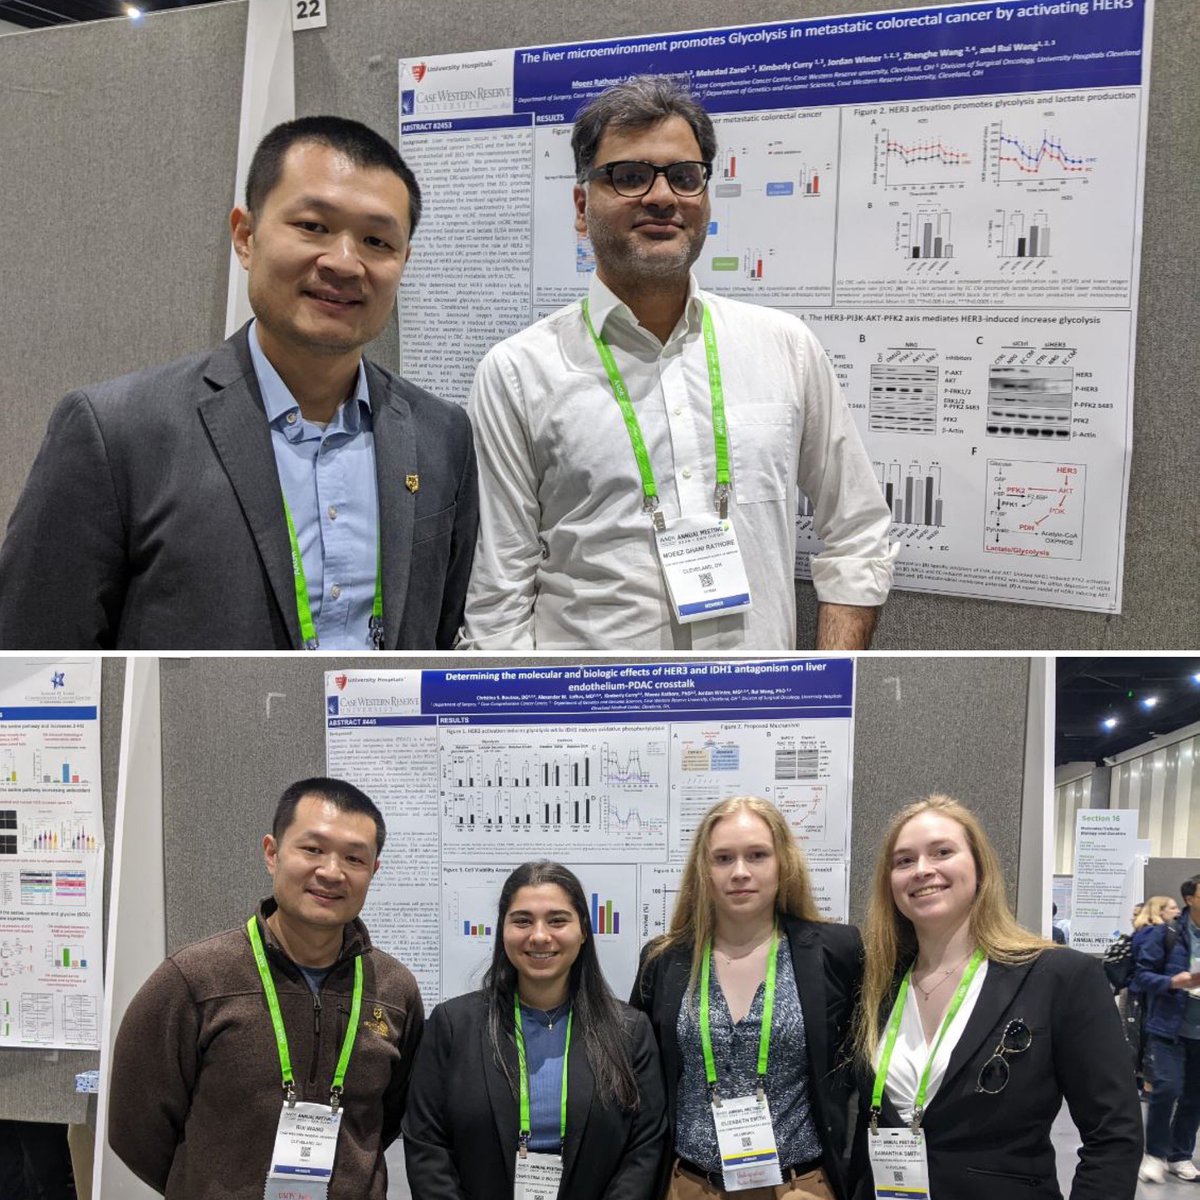 Another great poster session from my lab with Dr. Moeez Rathore and Dr. @CSBoutros @AACR @caseccc @UH_RE_Institute @UHSurgOncology @cwru #AACR24 #PancreaticCancer #ColonCancer